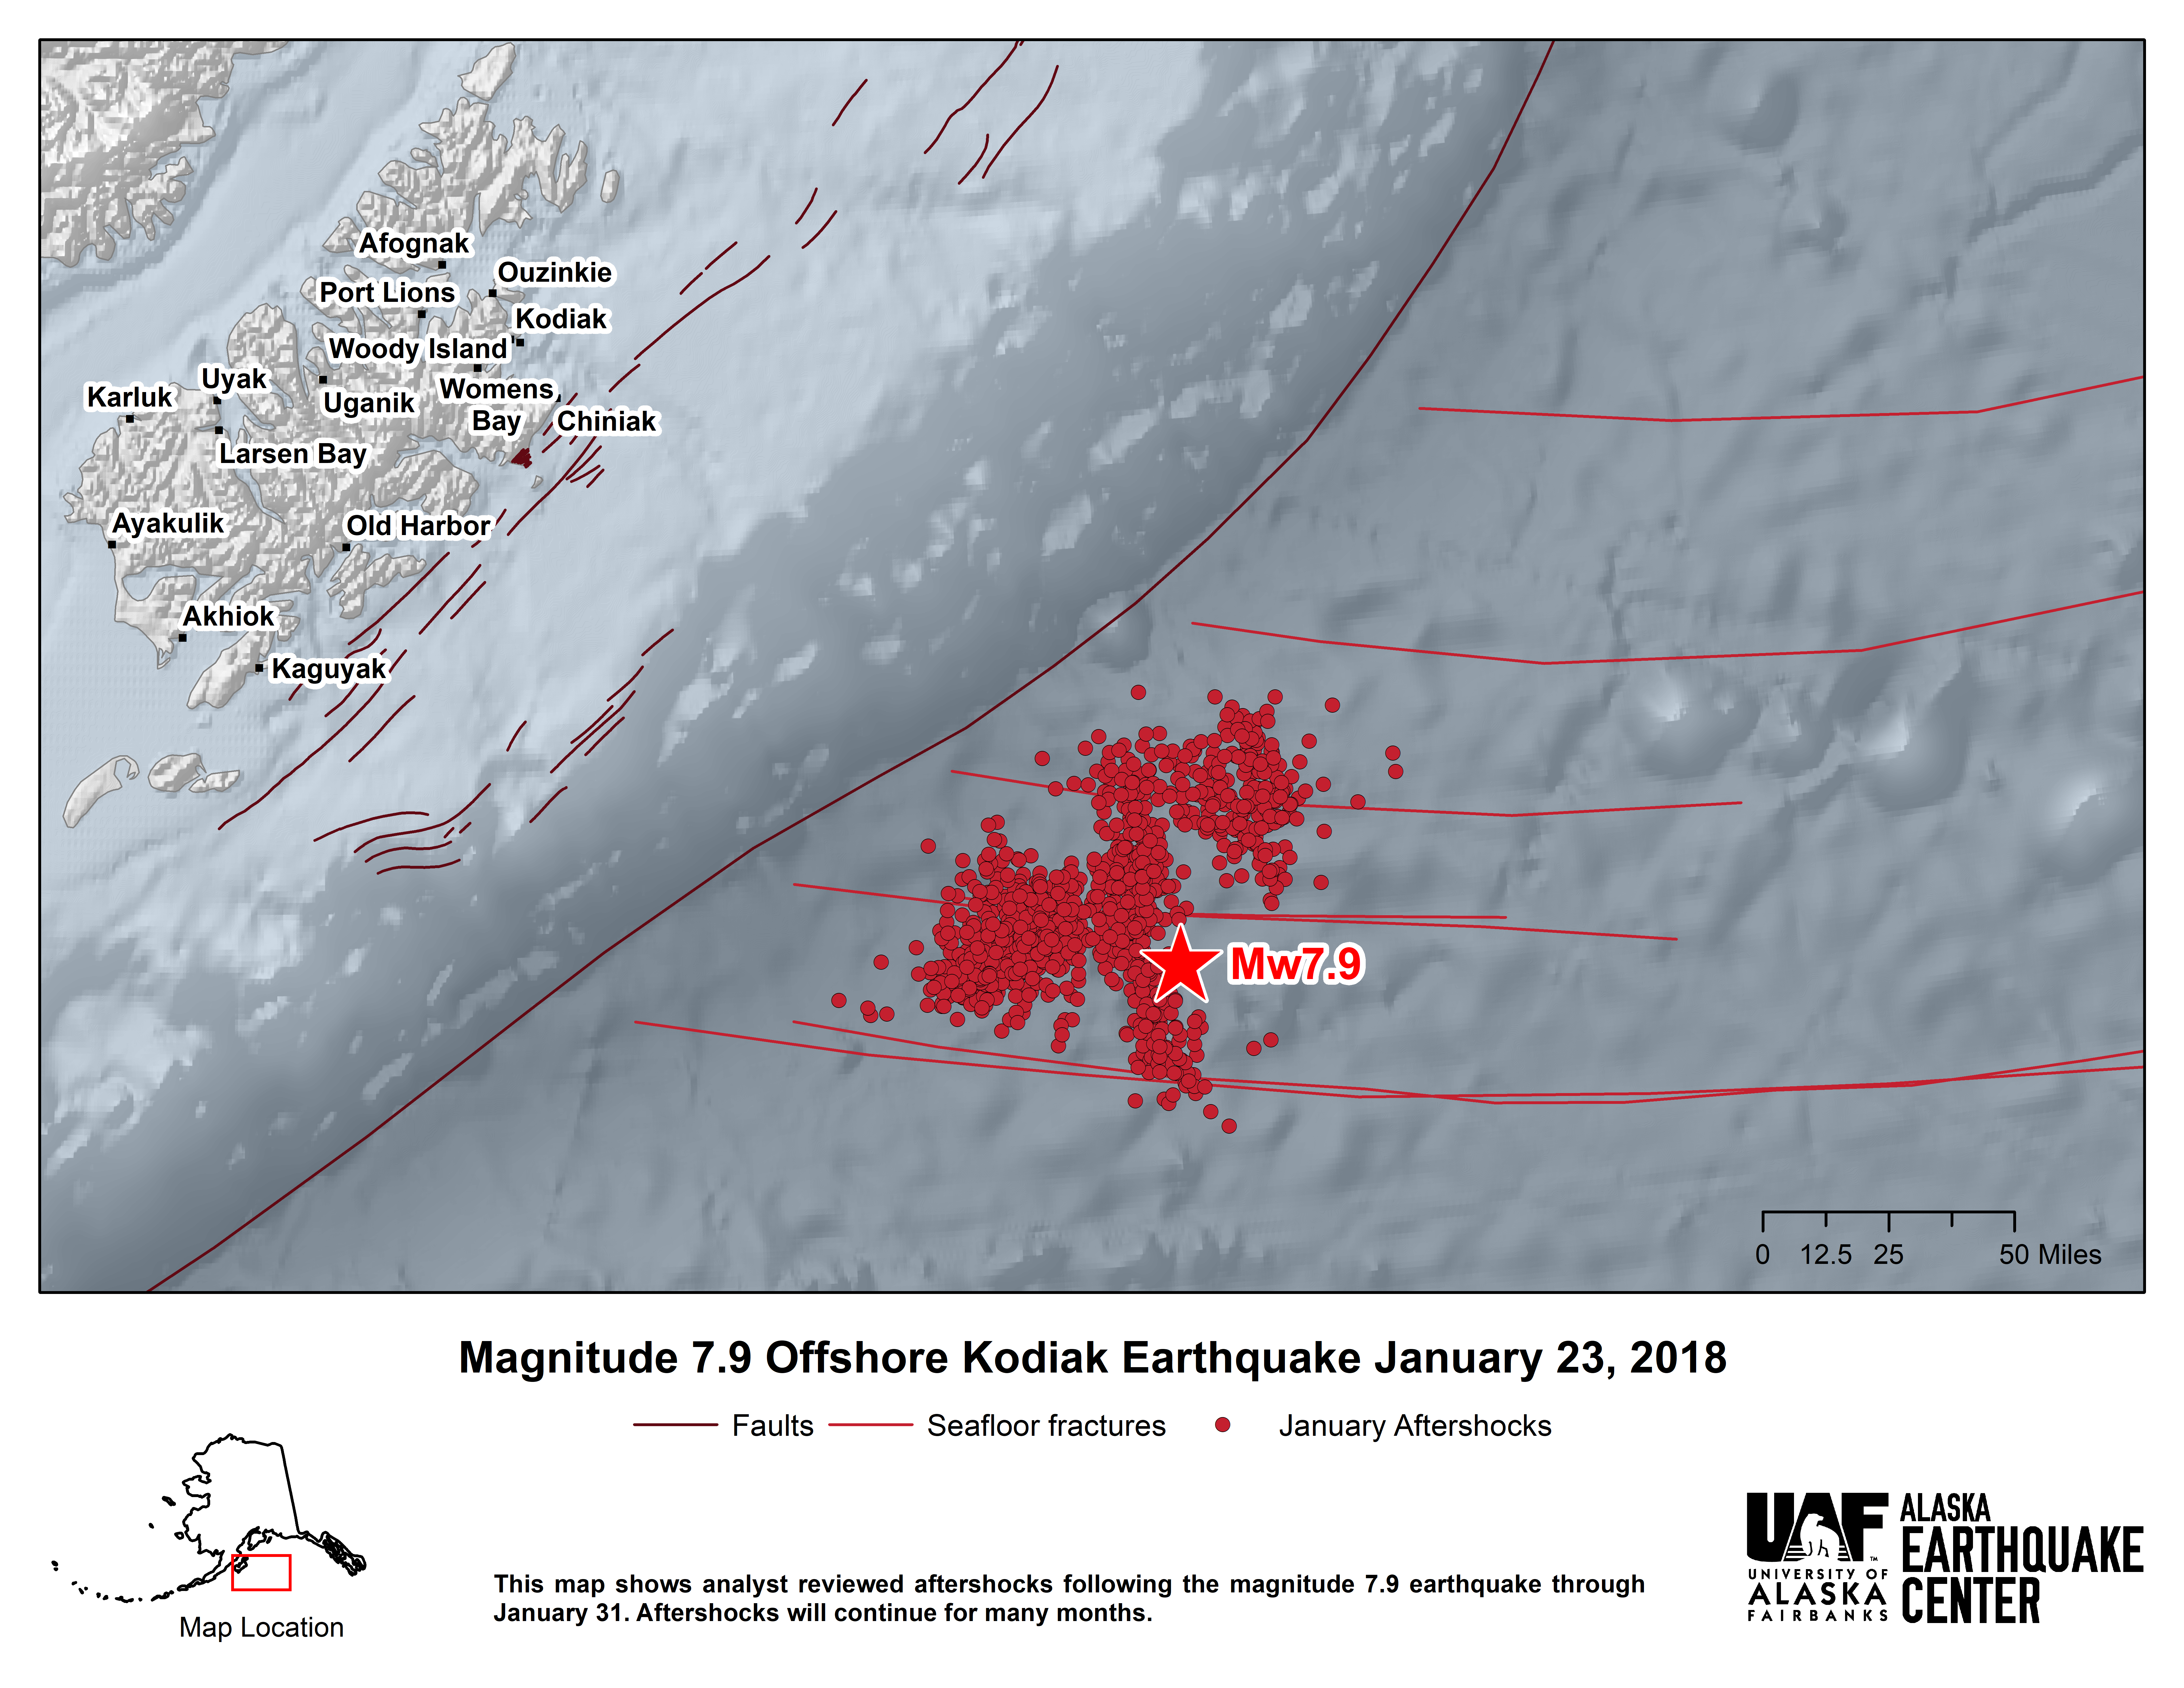 Map of all January aftershocks following the M7.9 mainshock.